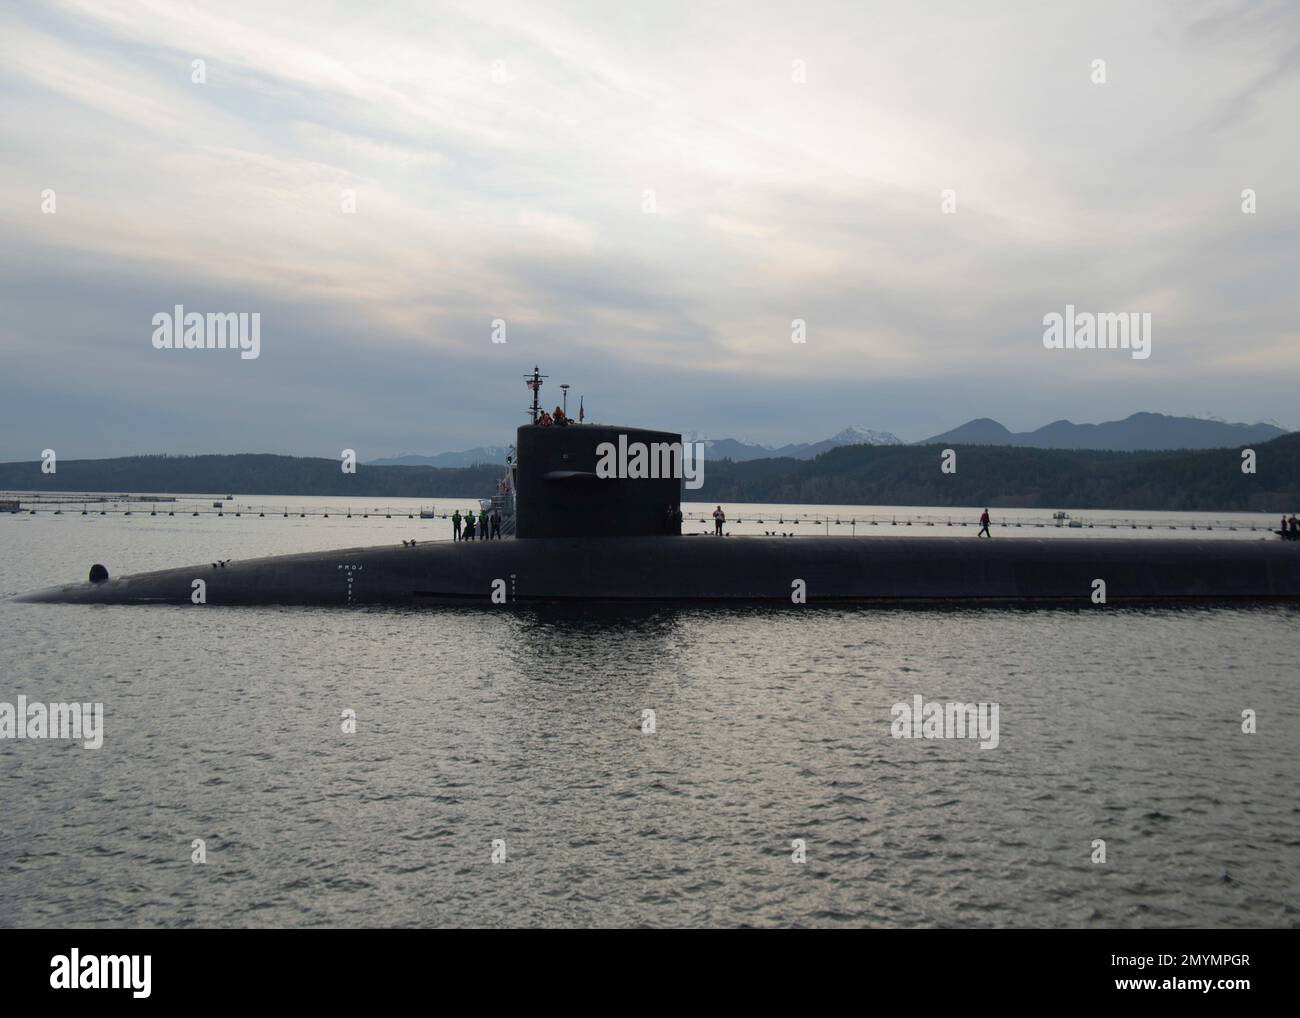 230202-N-CE703-1017    HOOD CANAL, Wash. (Feb. 2, 2023) – The Ohio-class ballistic missile submarine USS Maine (SSBN 741) transits the Hood Canal in preparation to moor at Naval Base Kitsap – Bangor, Washington, Feb. 3, 2023. Maine is one of eight ballistic-missile submarines stationed at Naval Base Kitsap-Bangor, providing the most survivable leg of the strategic deterrence triad for the United States. (U.S. Navy photo by Mass Communication Specialist 2nd Class Ian Zagrocki) Stock Photo